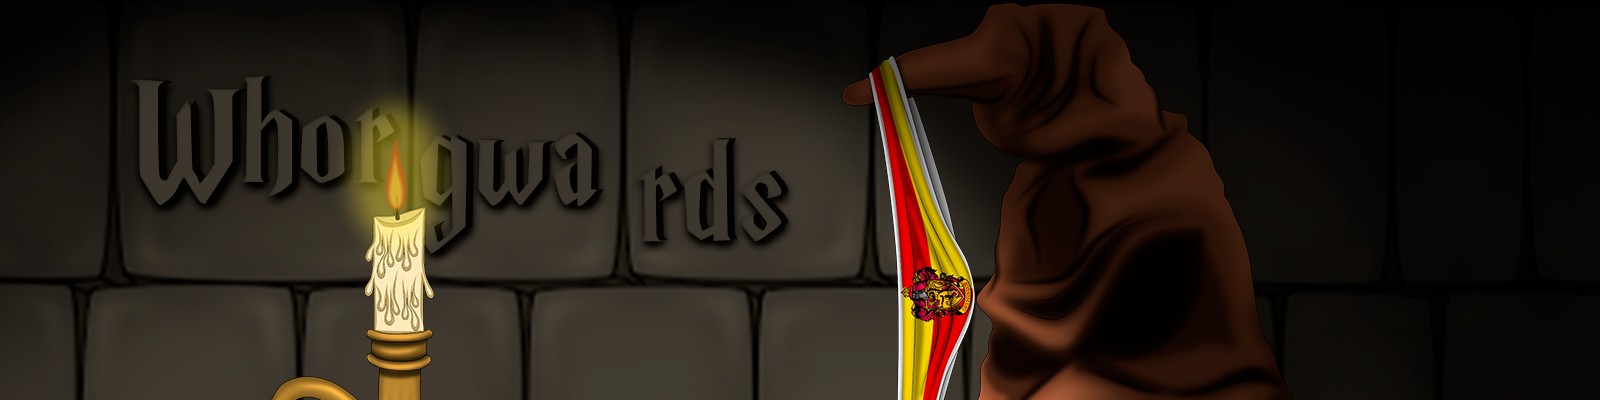 Whorgwards Adult Game Android Apk Download (1)